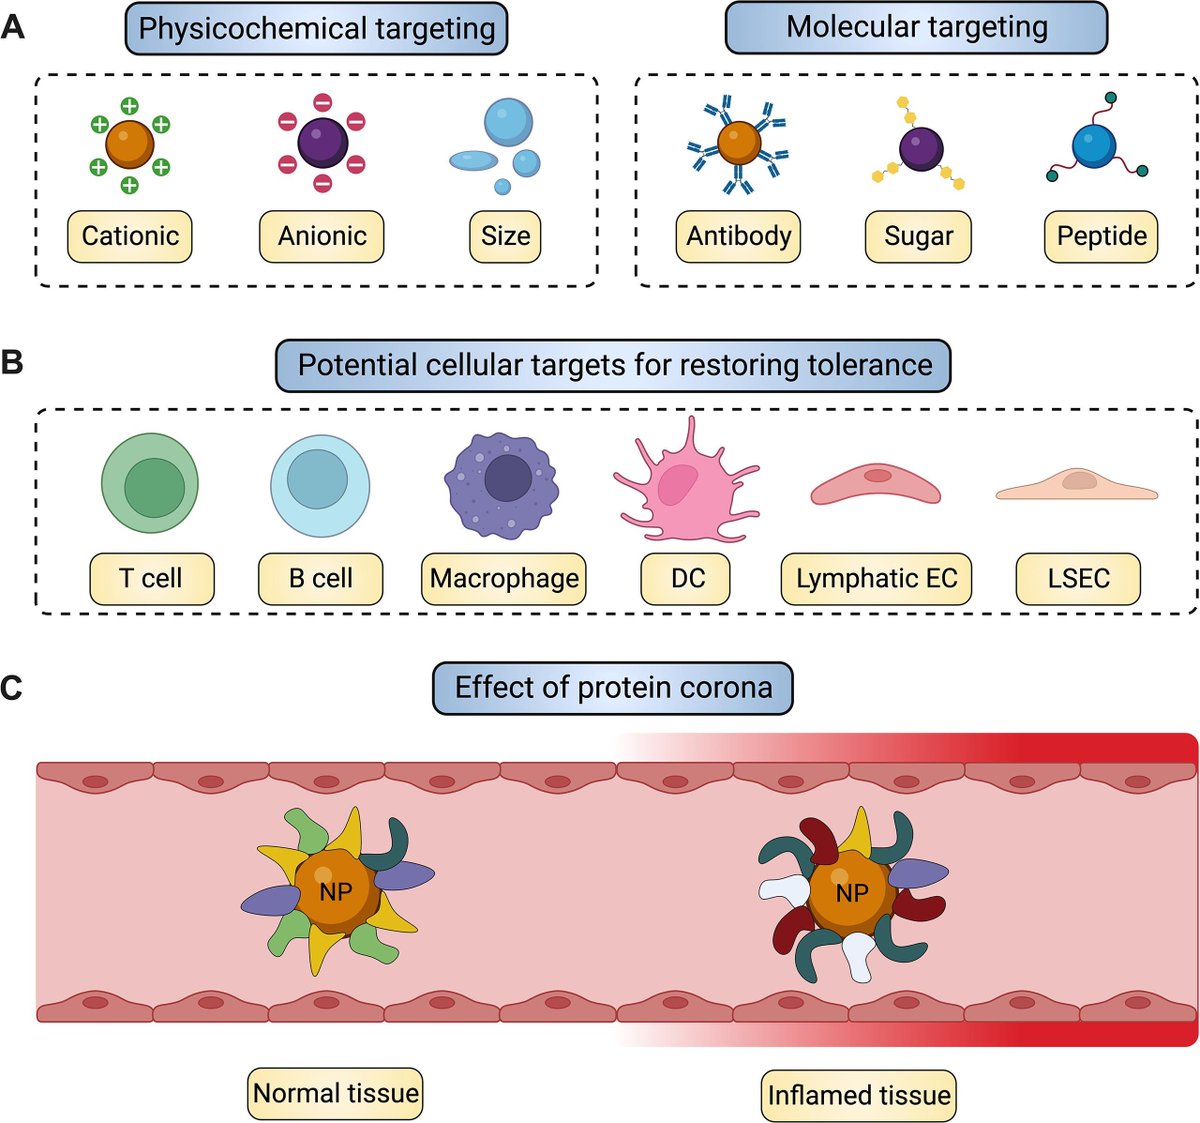 Check out our latest in Advanced Drug Delivery Reviews @ADDReditors led by @MJMitchell_Lab PhD student @ASThatte2 on emerging strategies for nanomedicine in autoimmunity! Great collaboration with @MagBillingsley @JilianMelamed @WeissmanLab Free access: sciencedirect.com/science/articl…